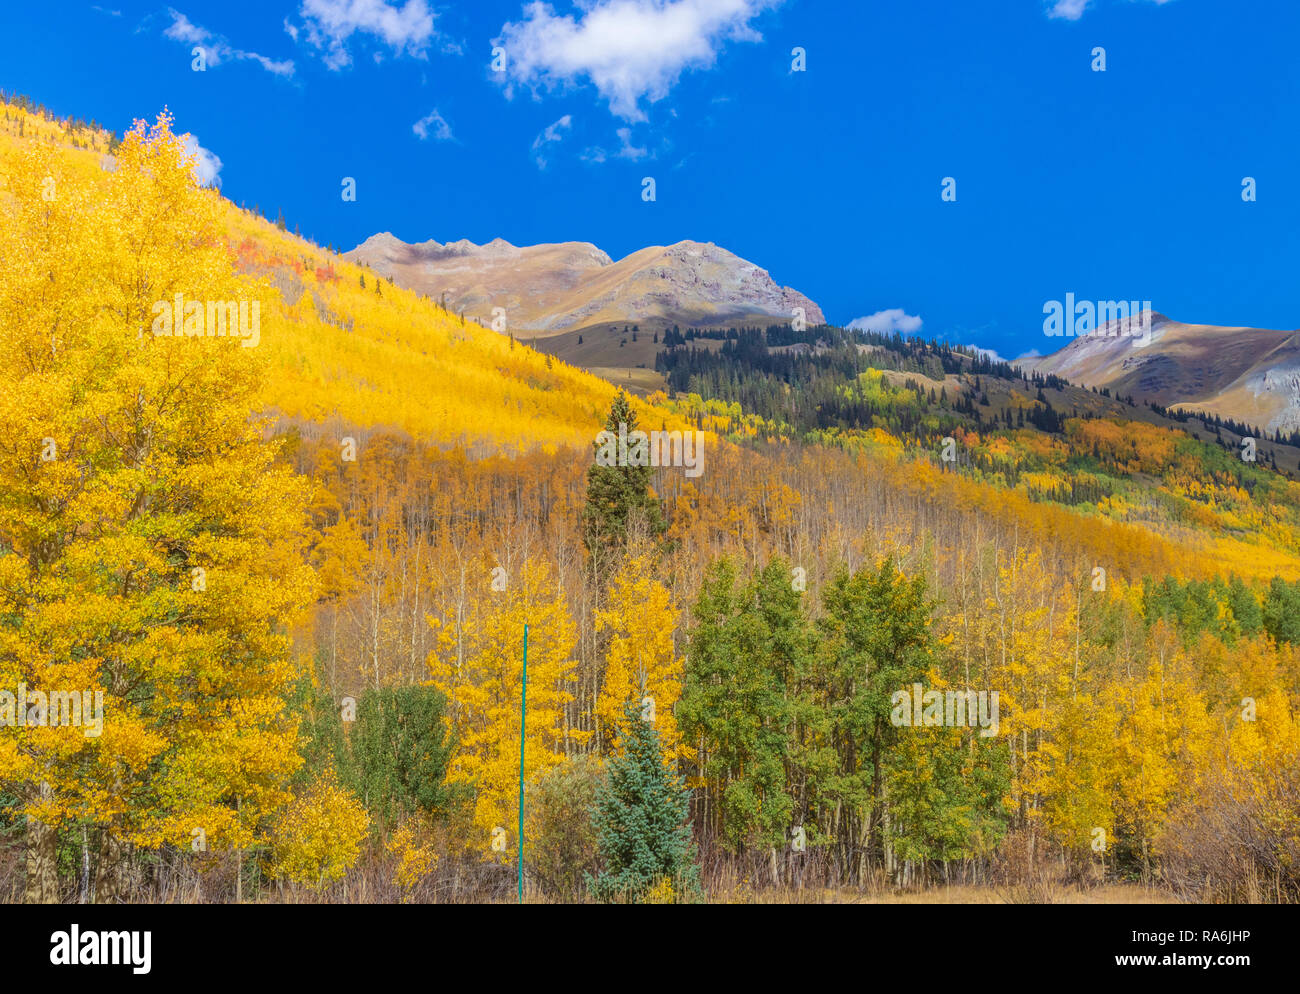 Aspen trees and autumn color along the US 550 portion of the San Juan Skyway between Ridgway and Silverton Colorado. Stock Photo